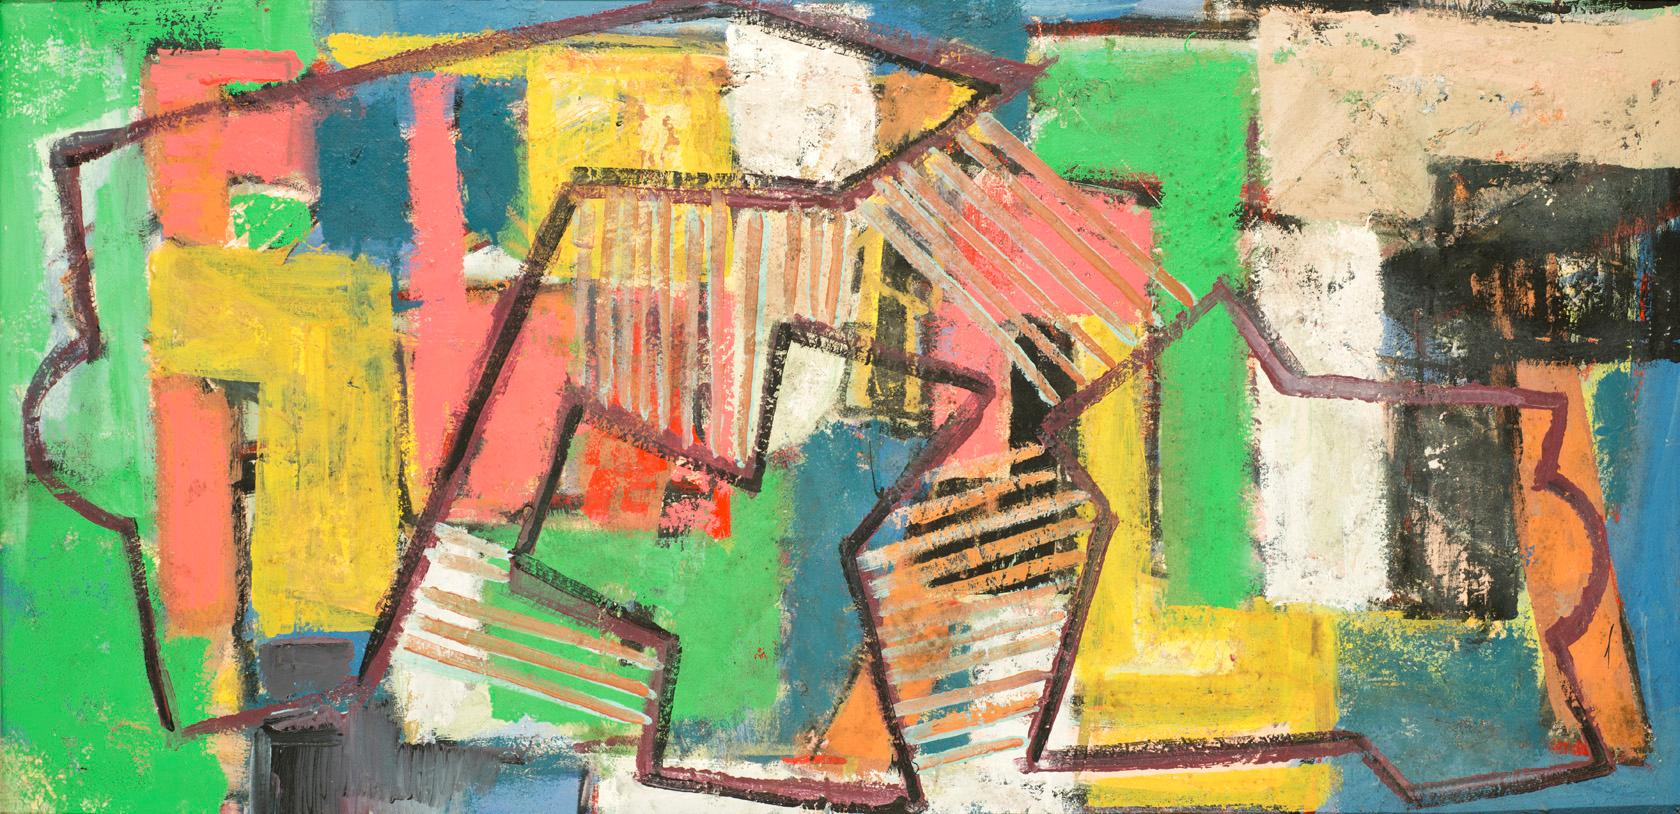 Ben Wilson Abstract Painting - Strings Attached, ca. 1990